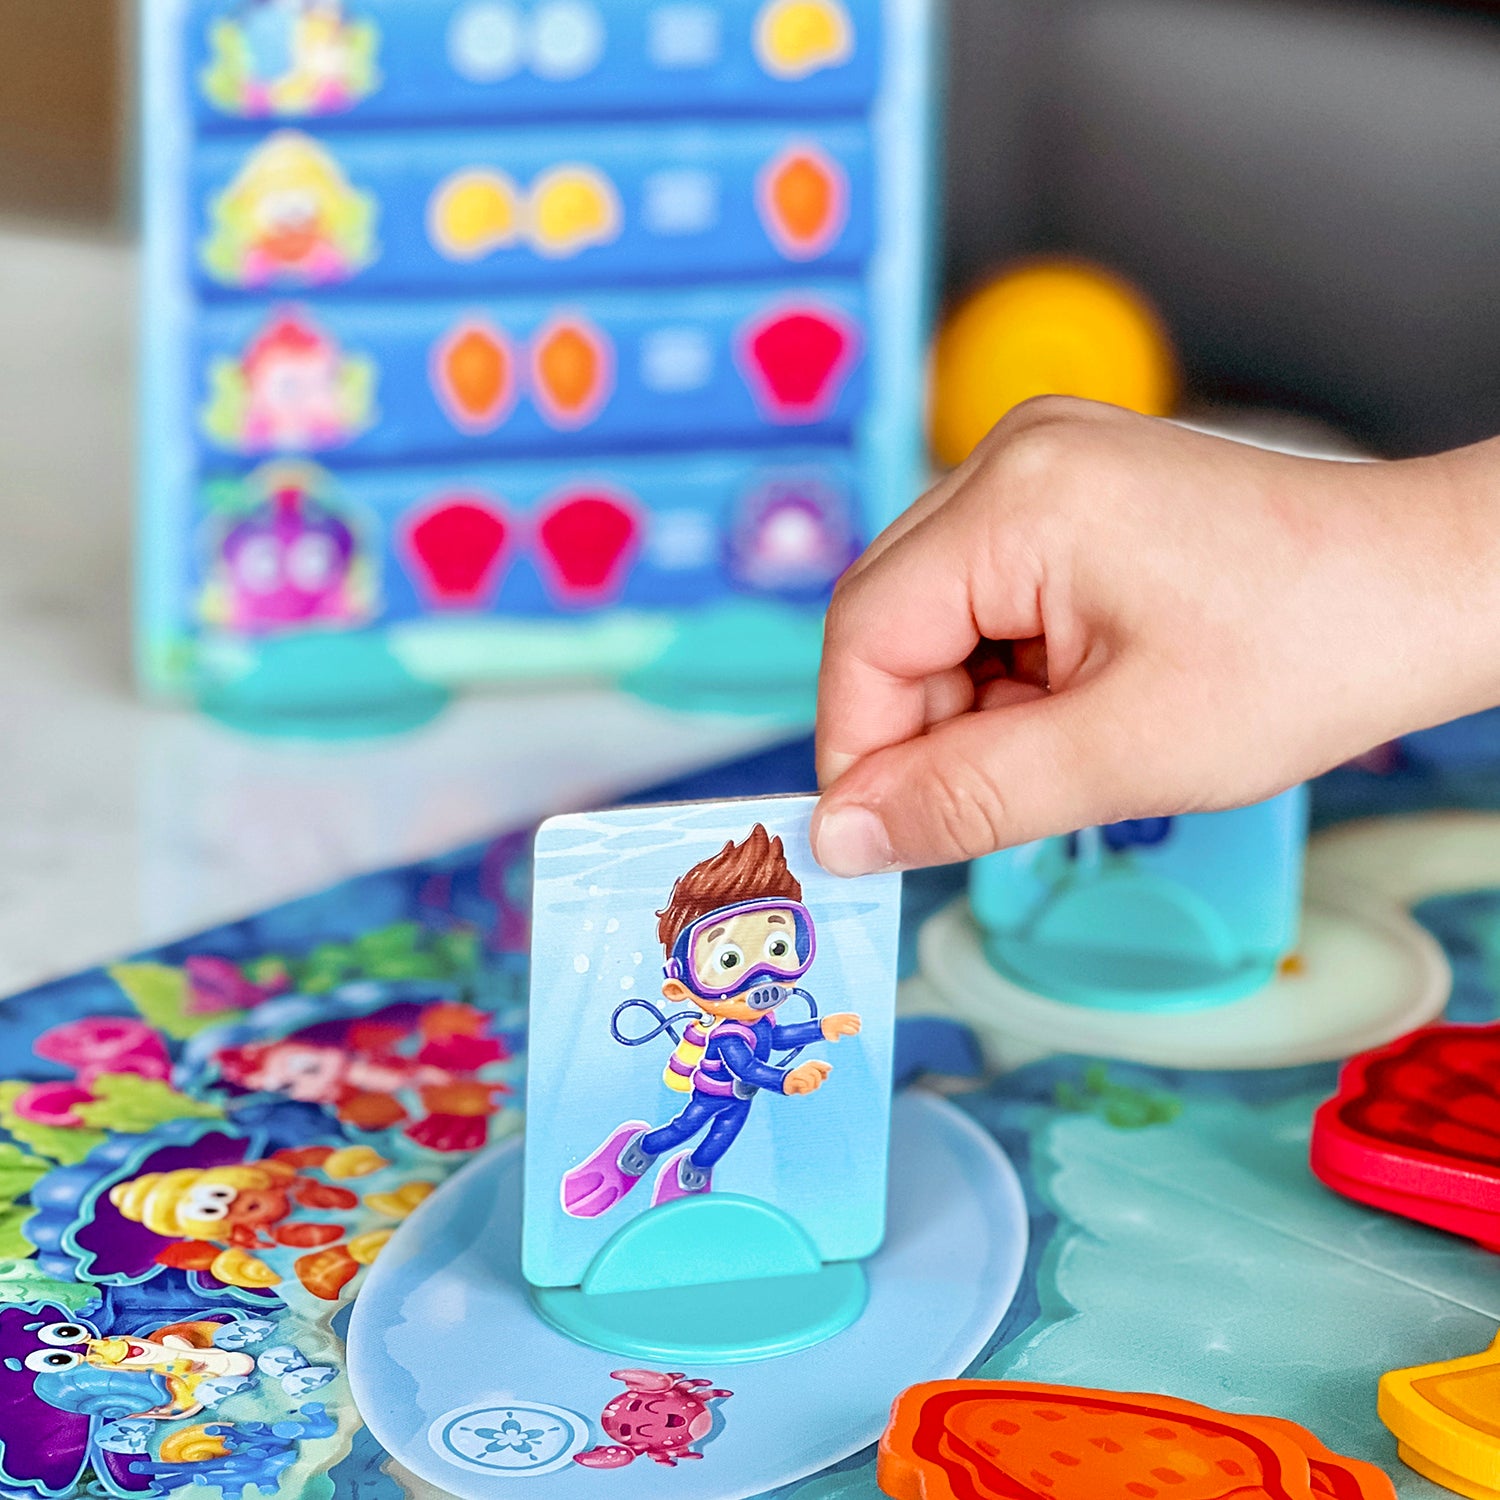 Shelly's Pearl by SimplyFun is an early trading game for ages 4 and up.